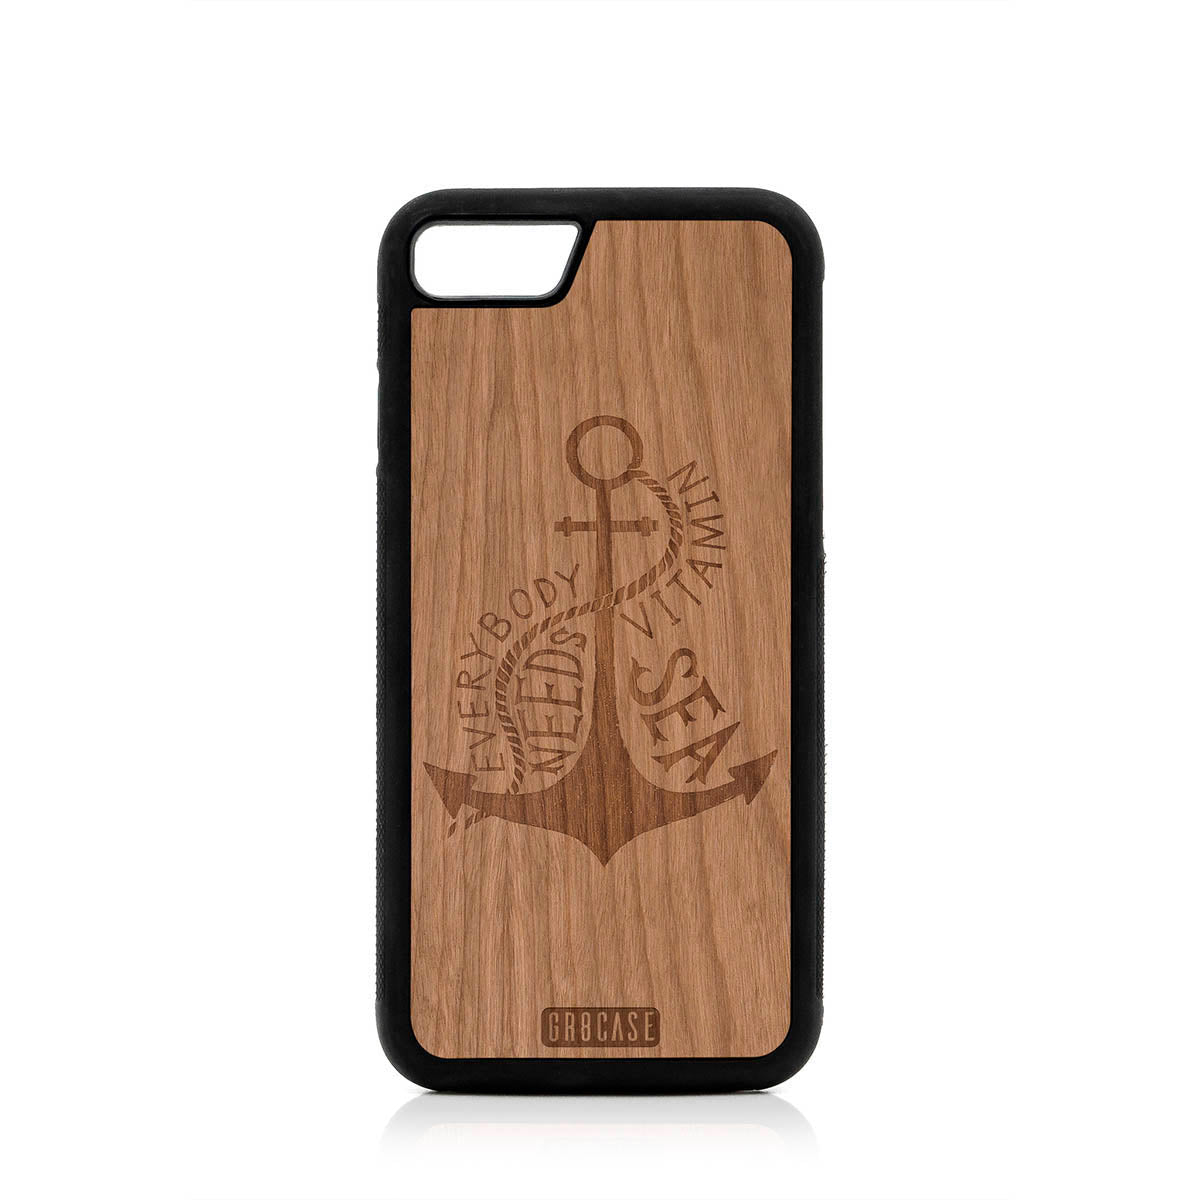 Everybody Needs Vitamin Sea (Anchor) Design Wood Case For iPhone 7/8 by GR8CASE